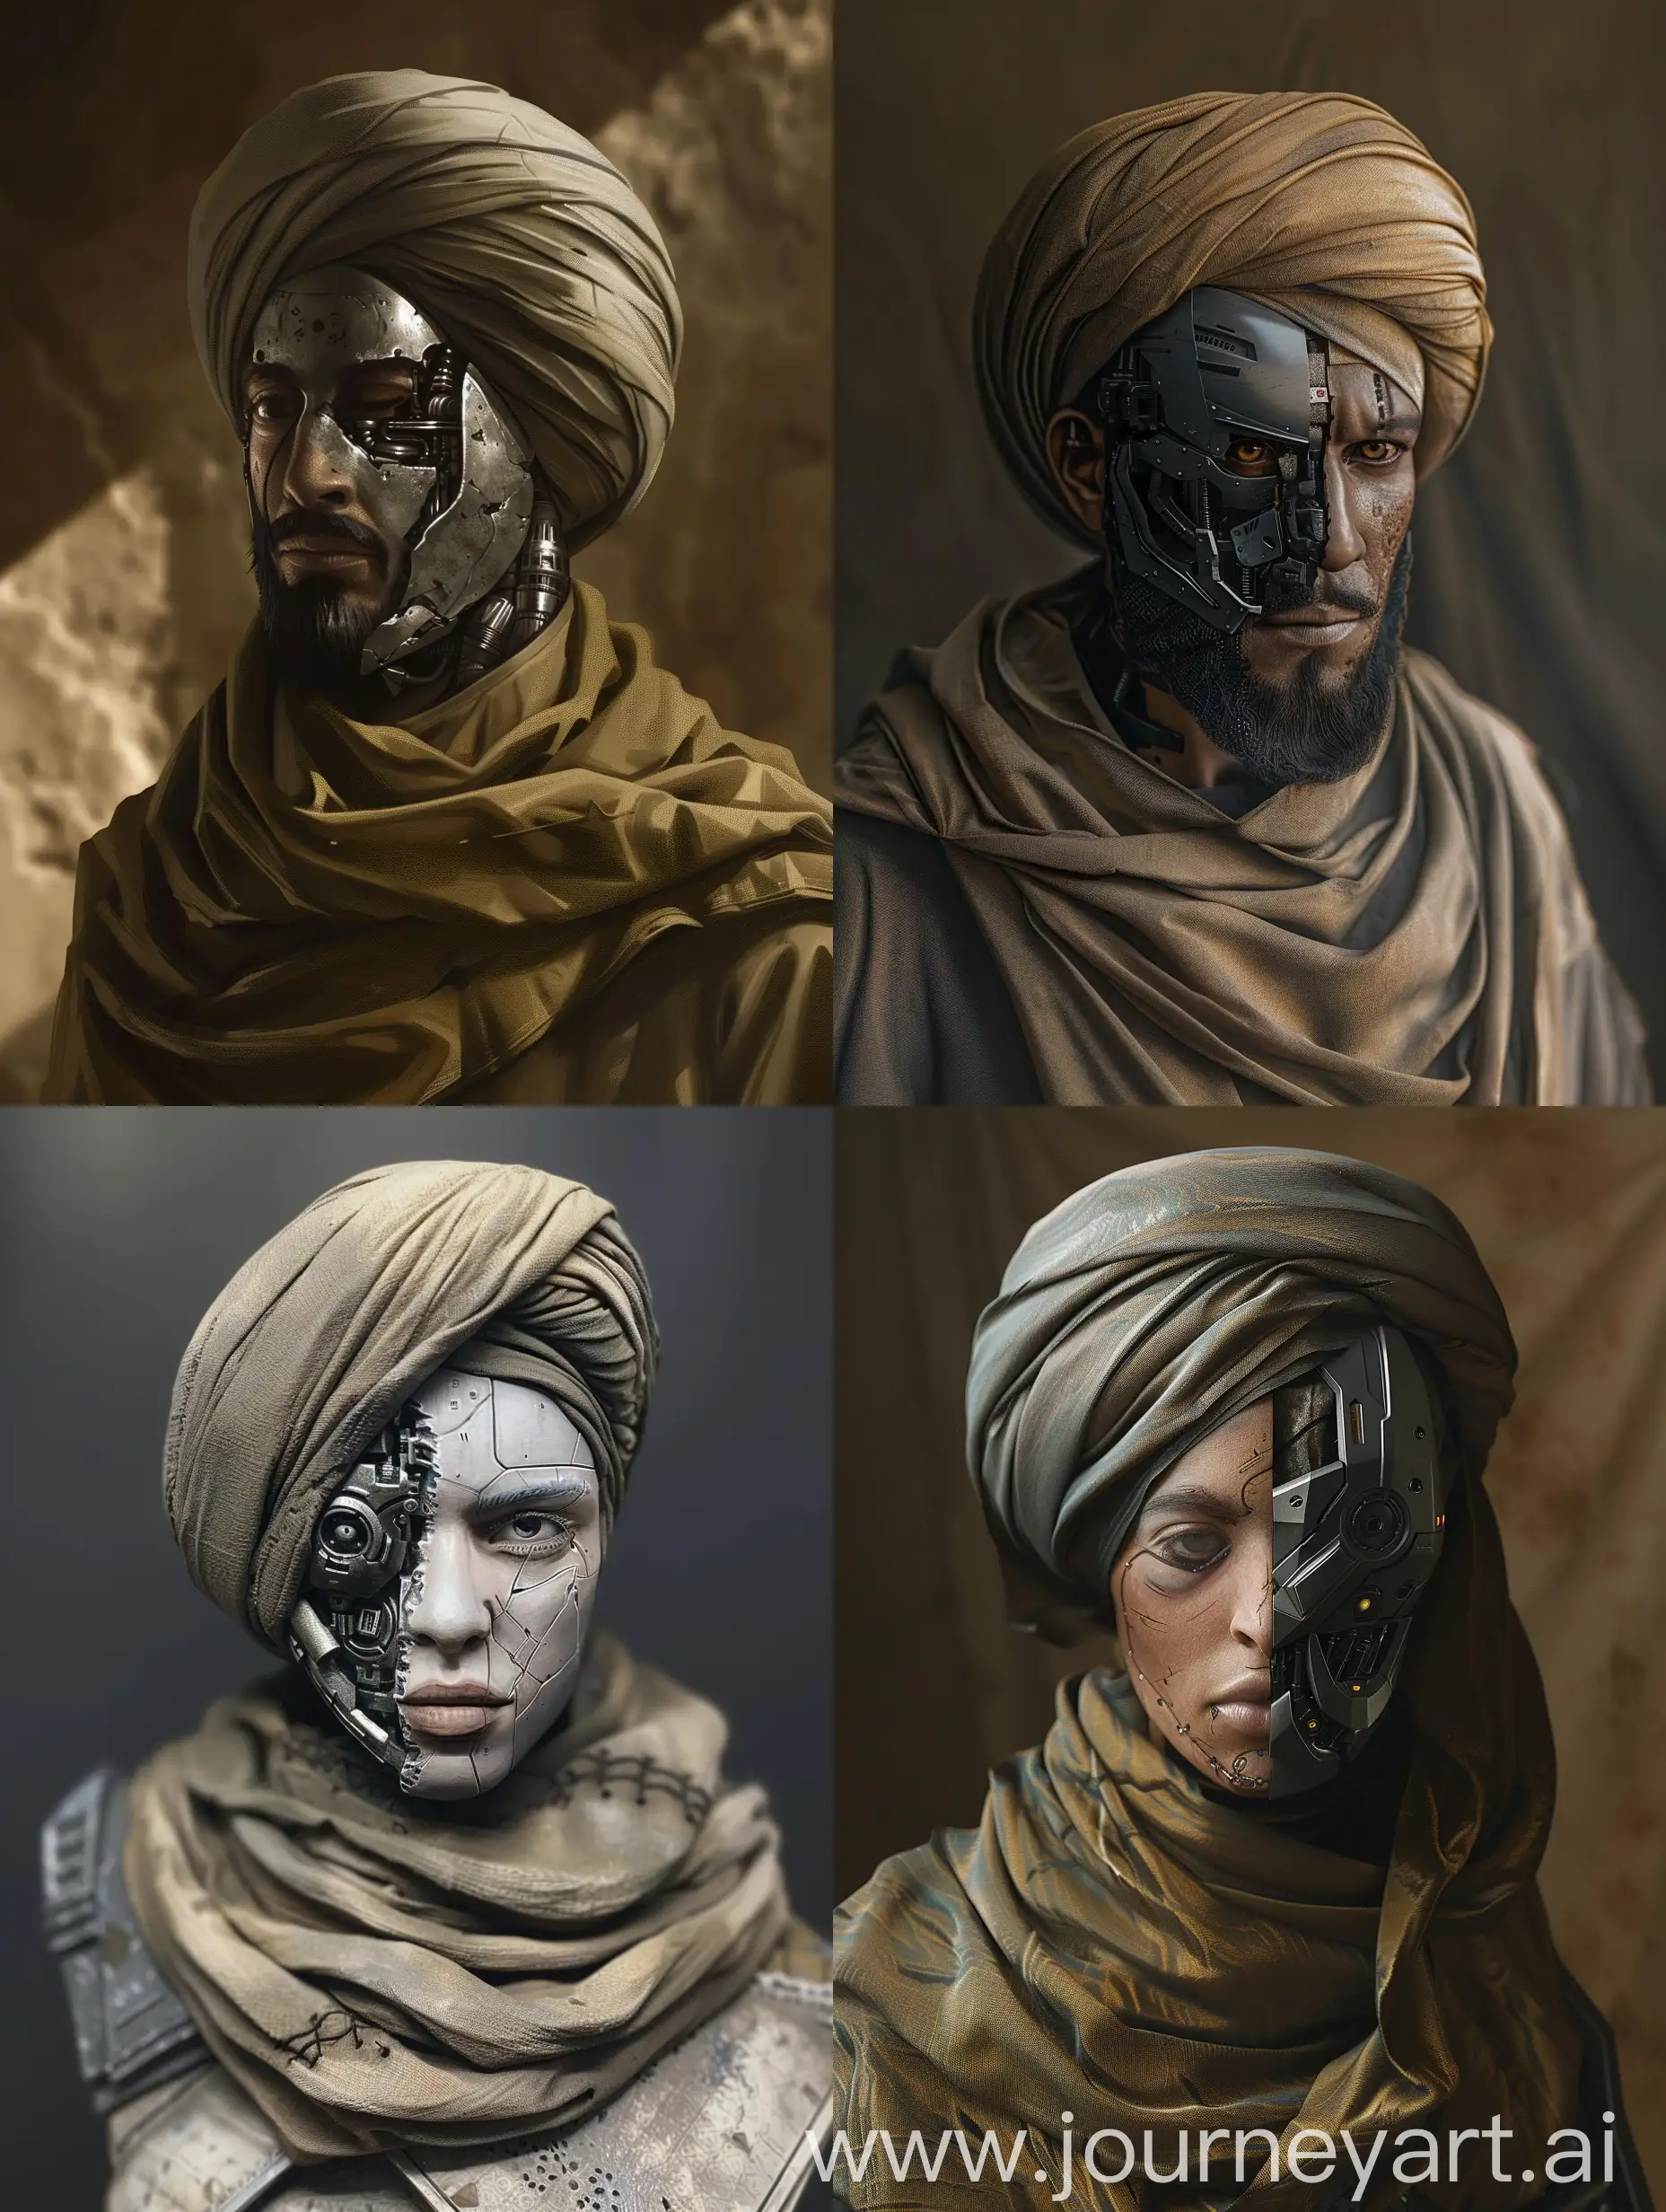 Muslim-Soldier-with-Cybernetic-HalfFace-in-Turban